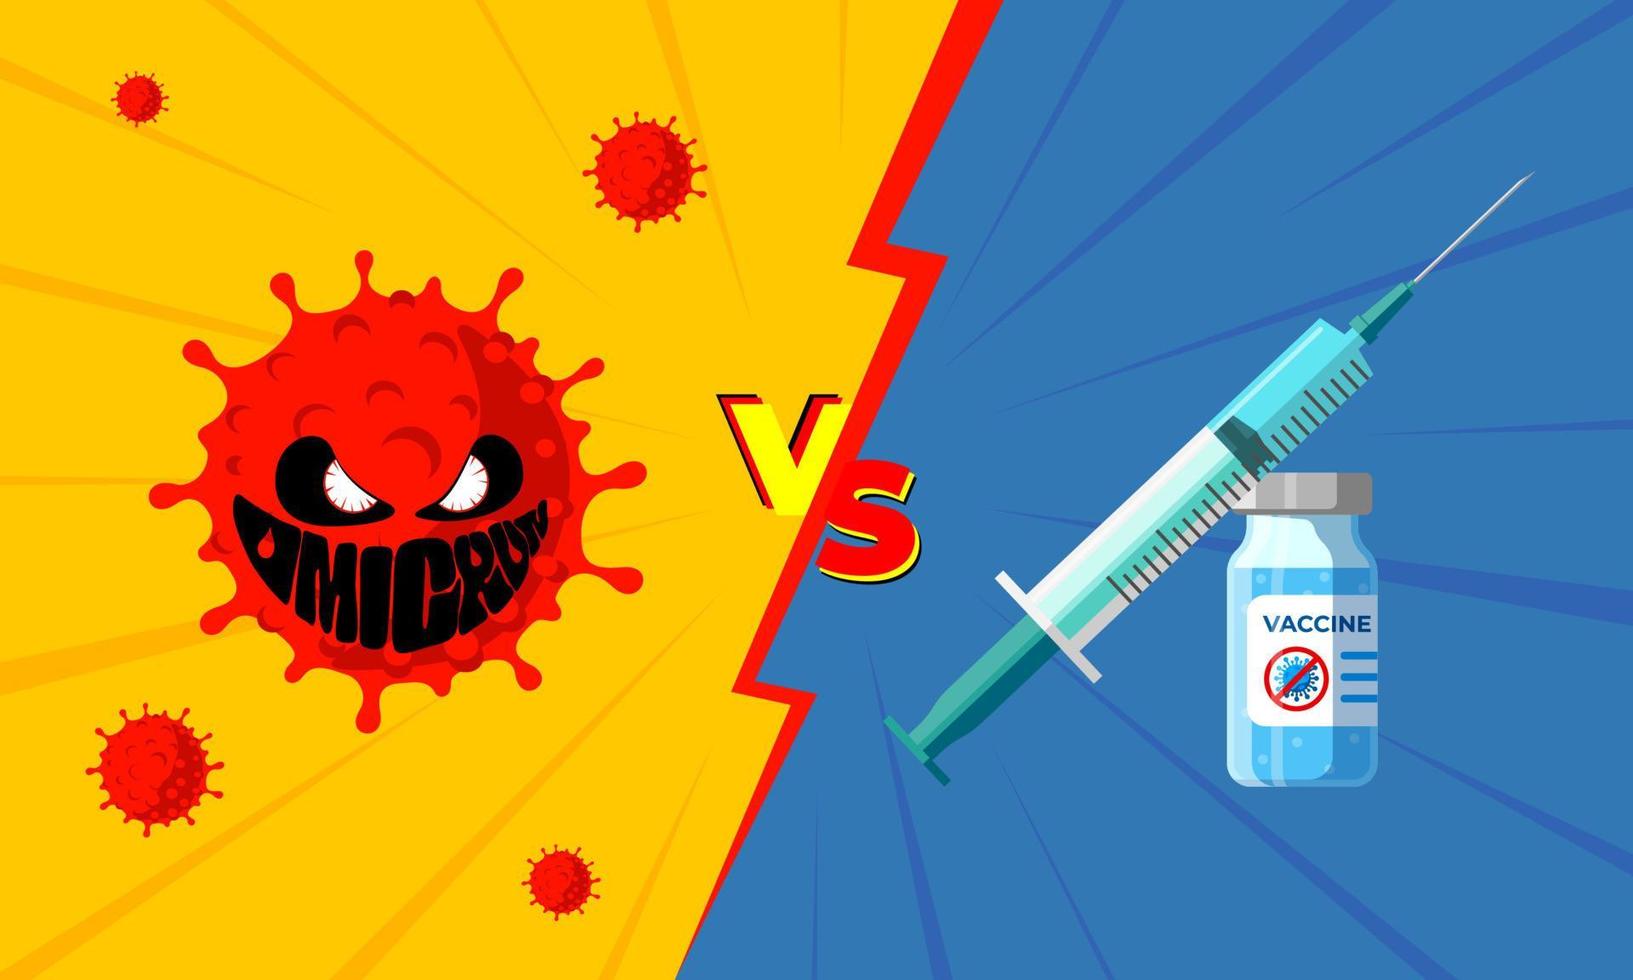 New coronavirus variant of COVID-19 strain omicron versus vaccination. Battle of medical vaccine vs mutated outbreak deadly infection corona virus that affects respiratory system. Banner vector